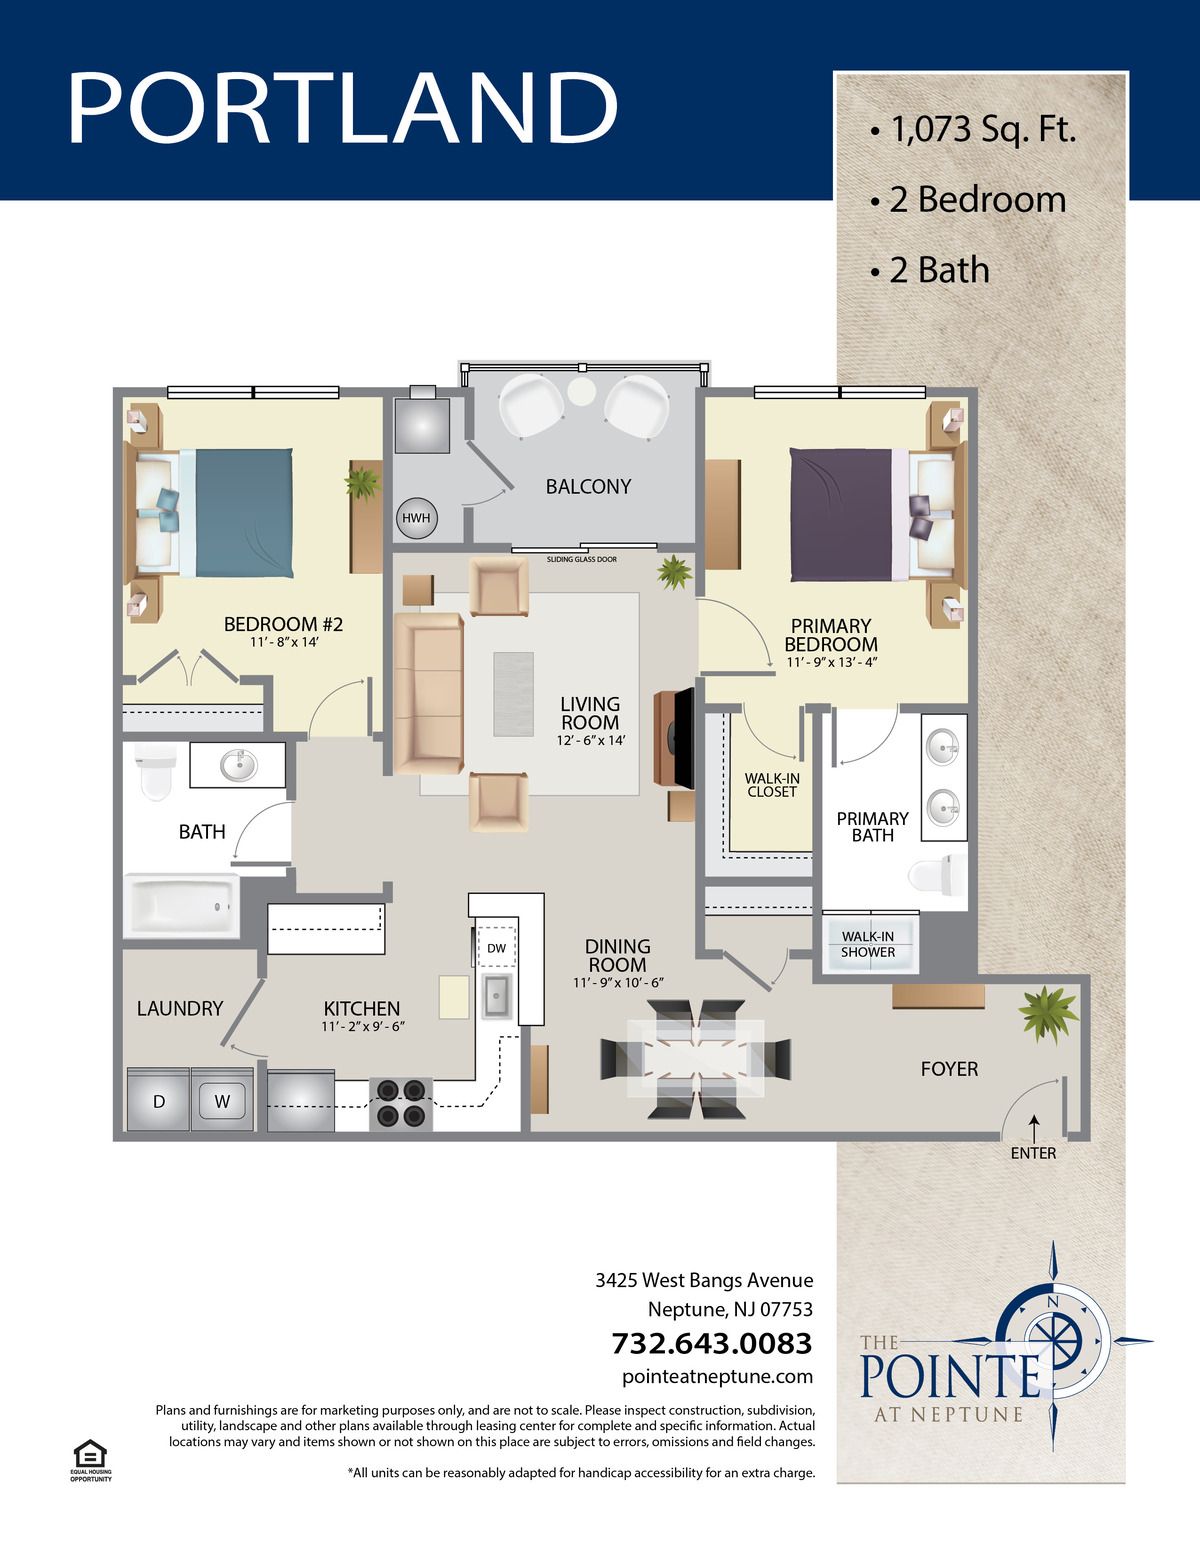 The Pointe At Neptune Floor Plan The Newport